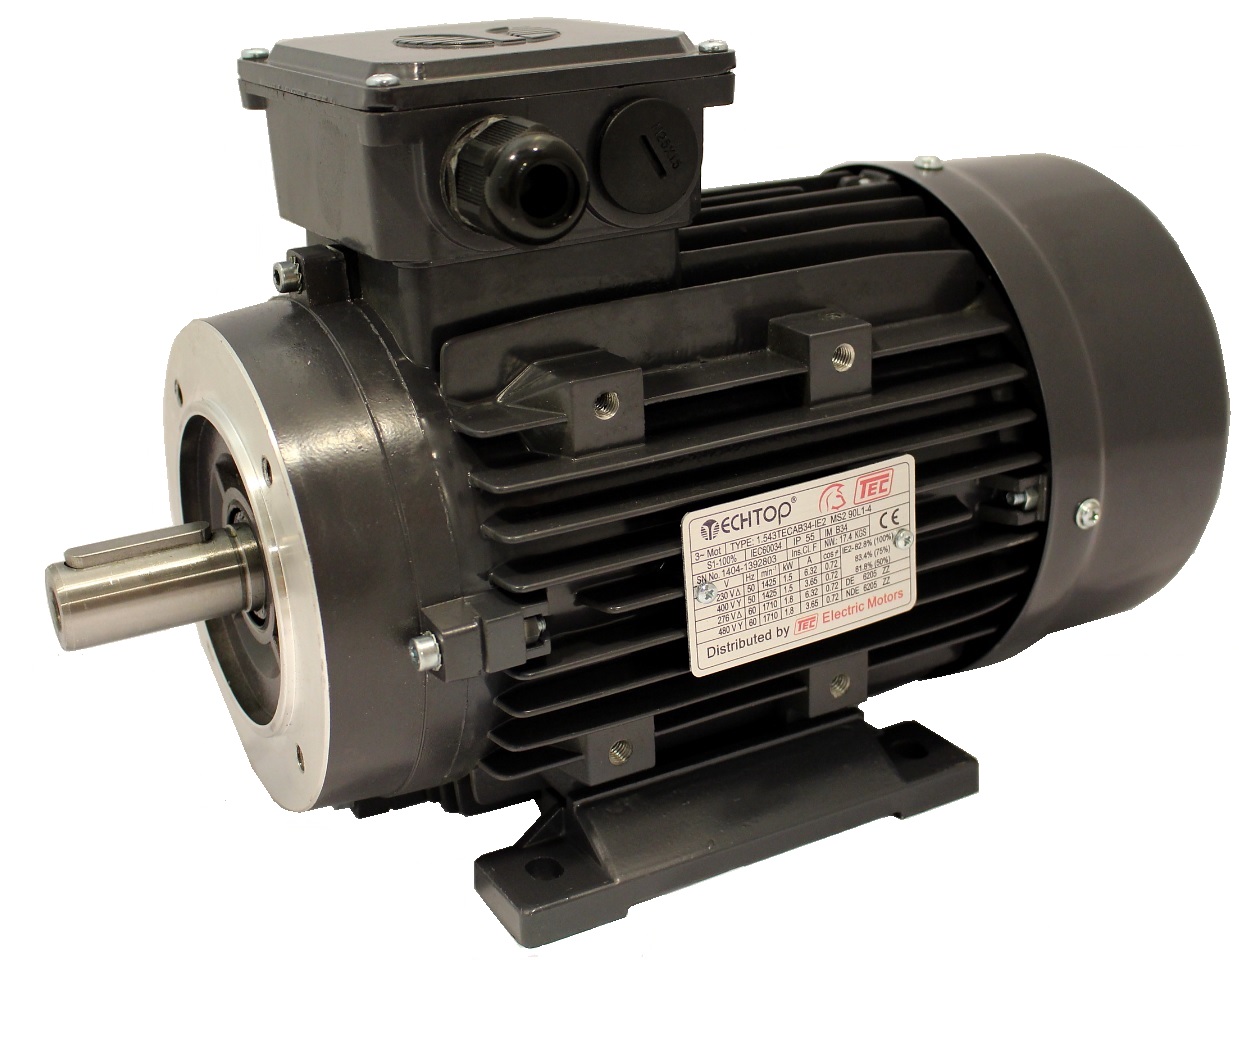 0.75Kw 4 pole 1500rpm with flange mount Three Phase 400v Electric Motor 